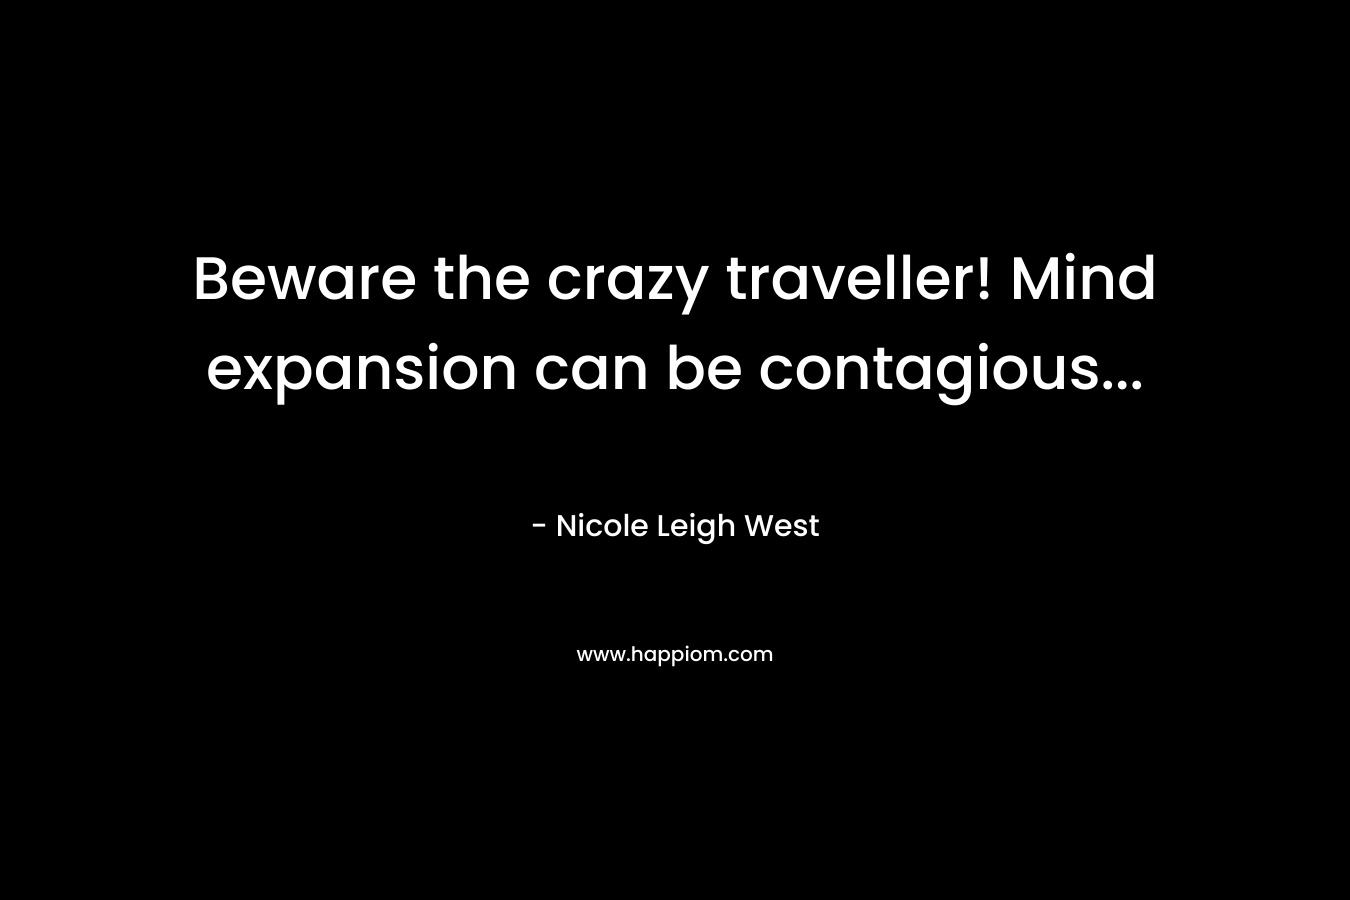 Beware the crazy traveller! Mind expansion can be contagious...